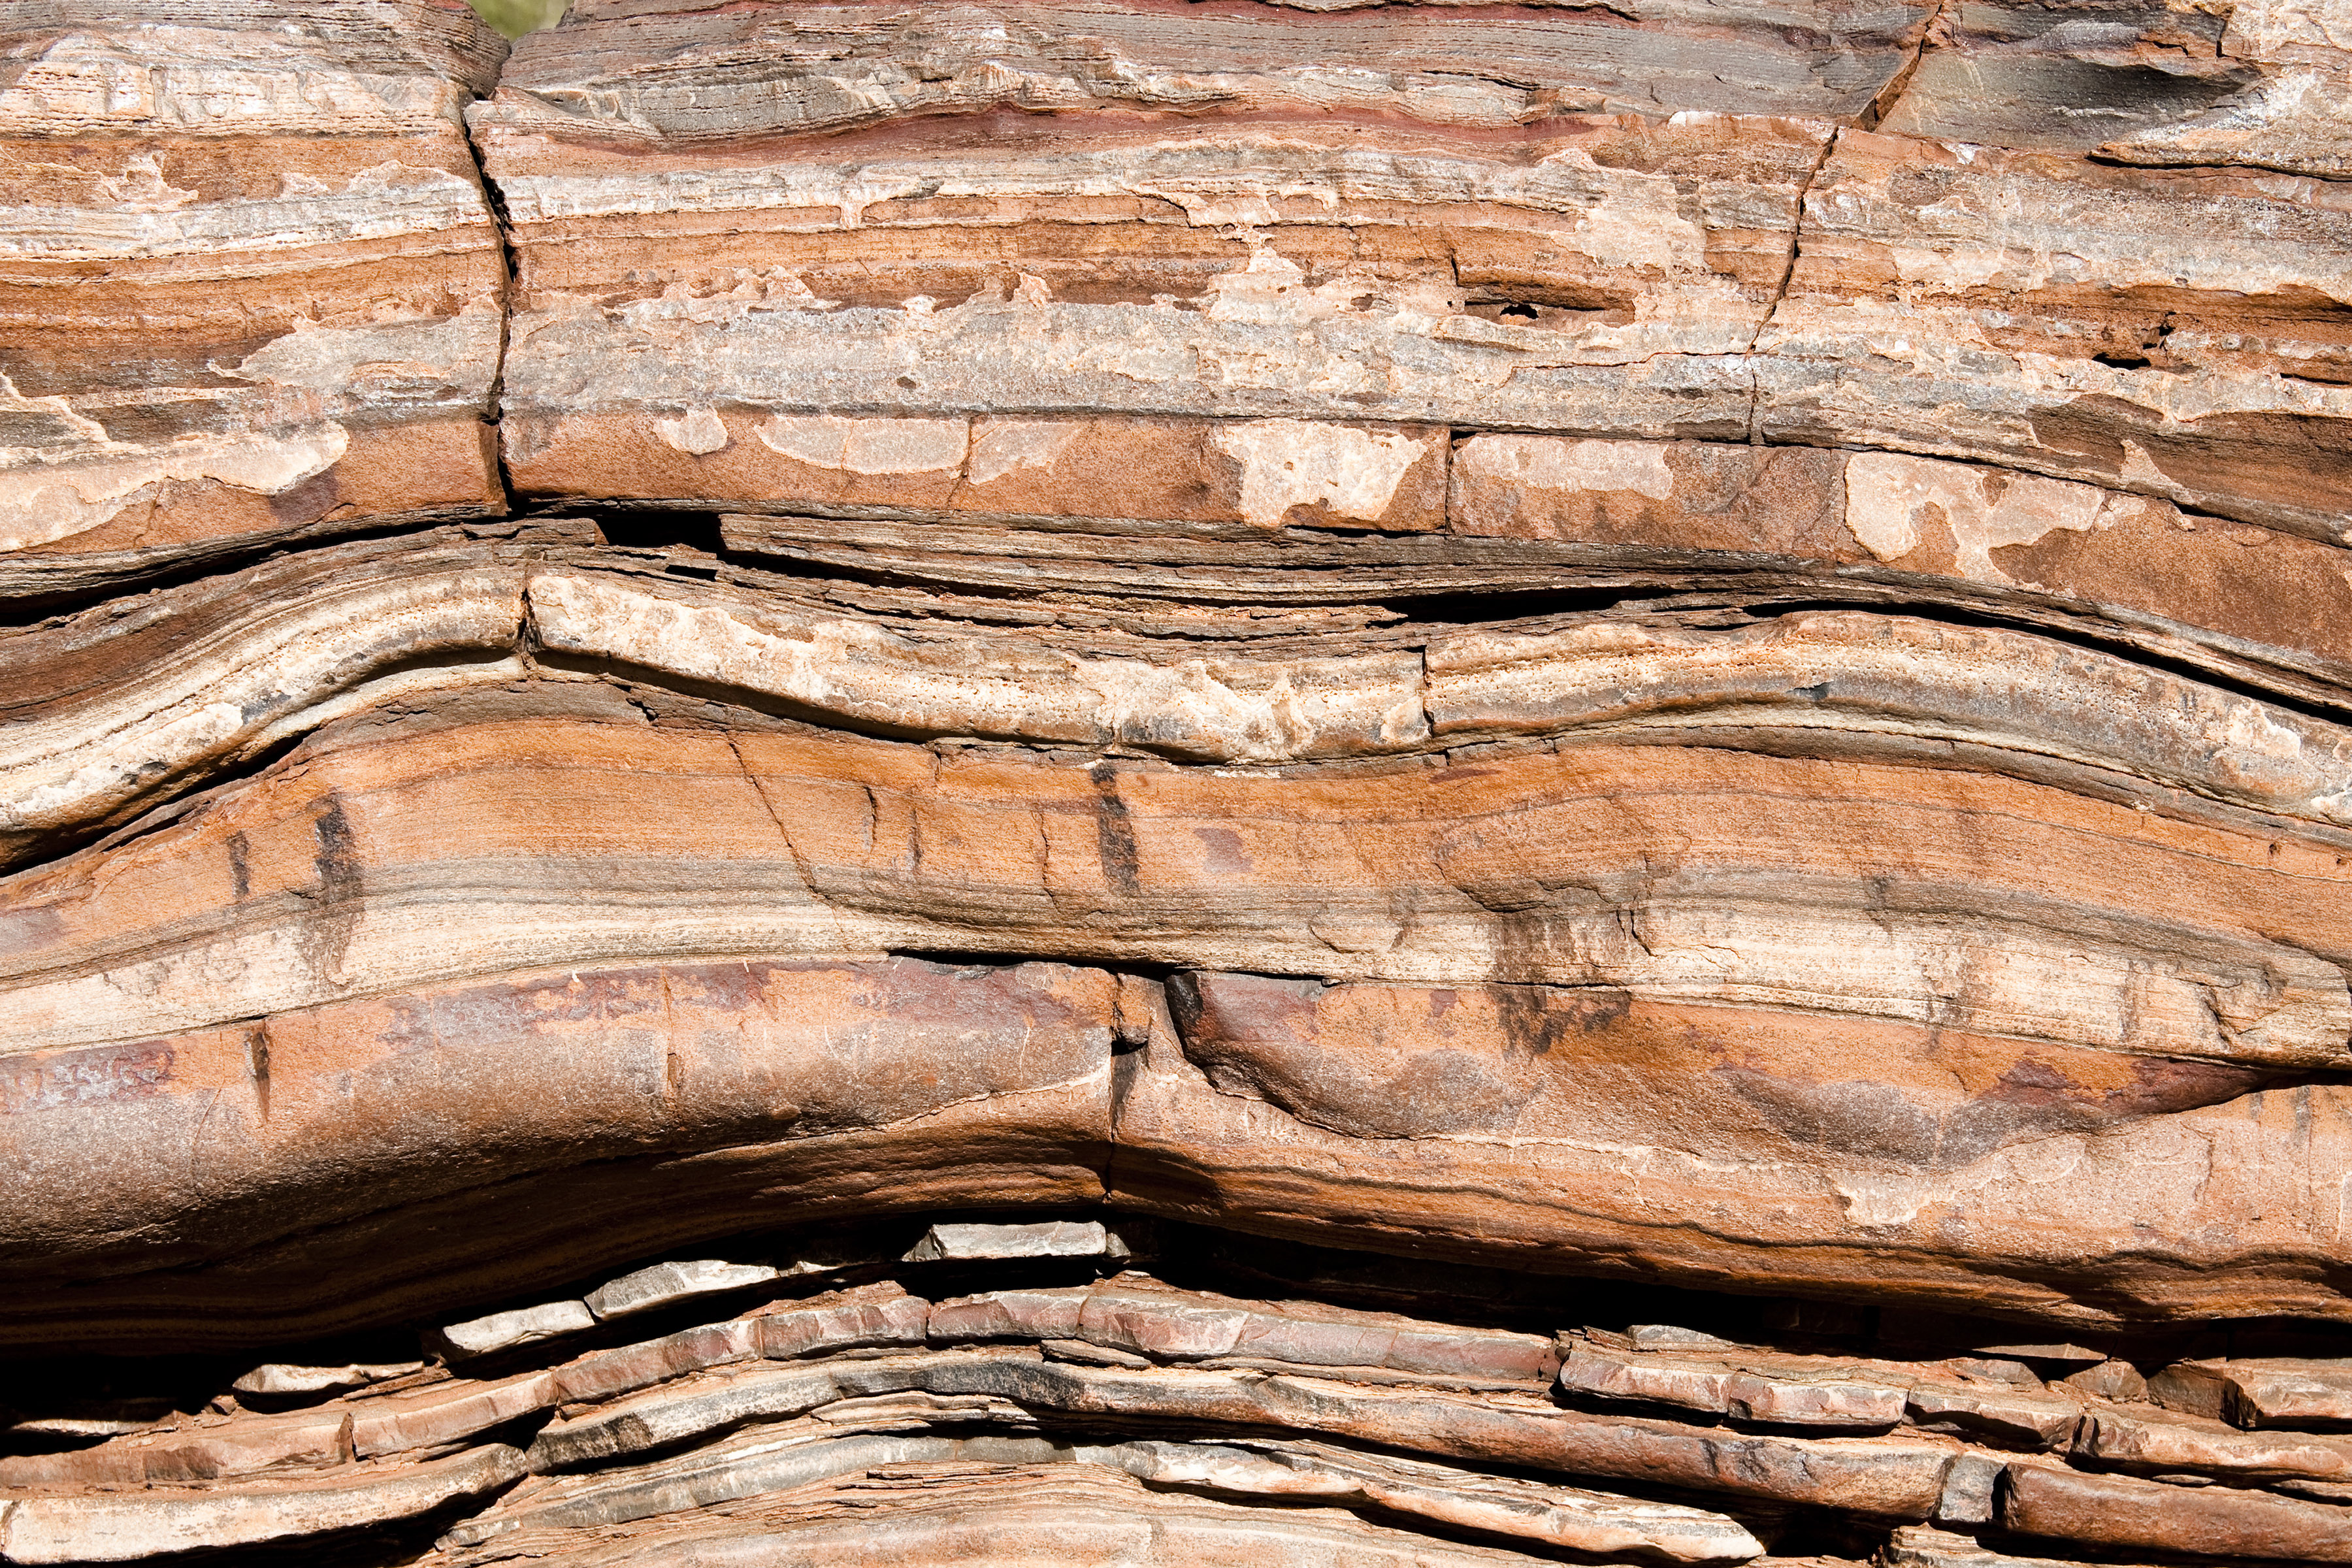 Rock strata. UConn researchers analyzed leaf wax compounds in soils and sediment to reconstruct ancient climates, with a view to better understanding the impact of future climate change. (Getty Images)